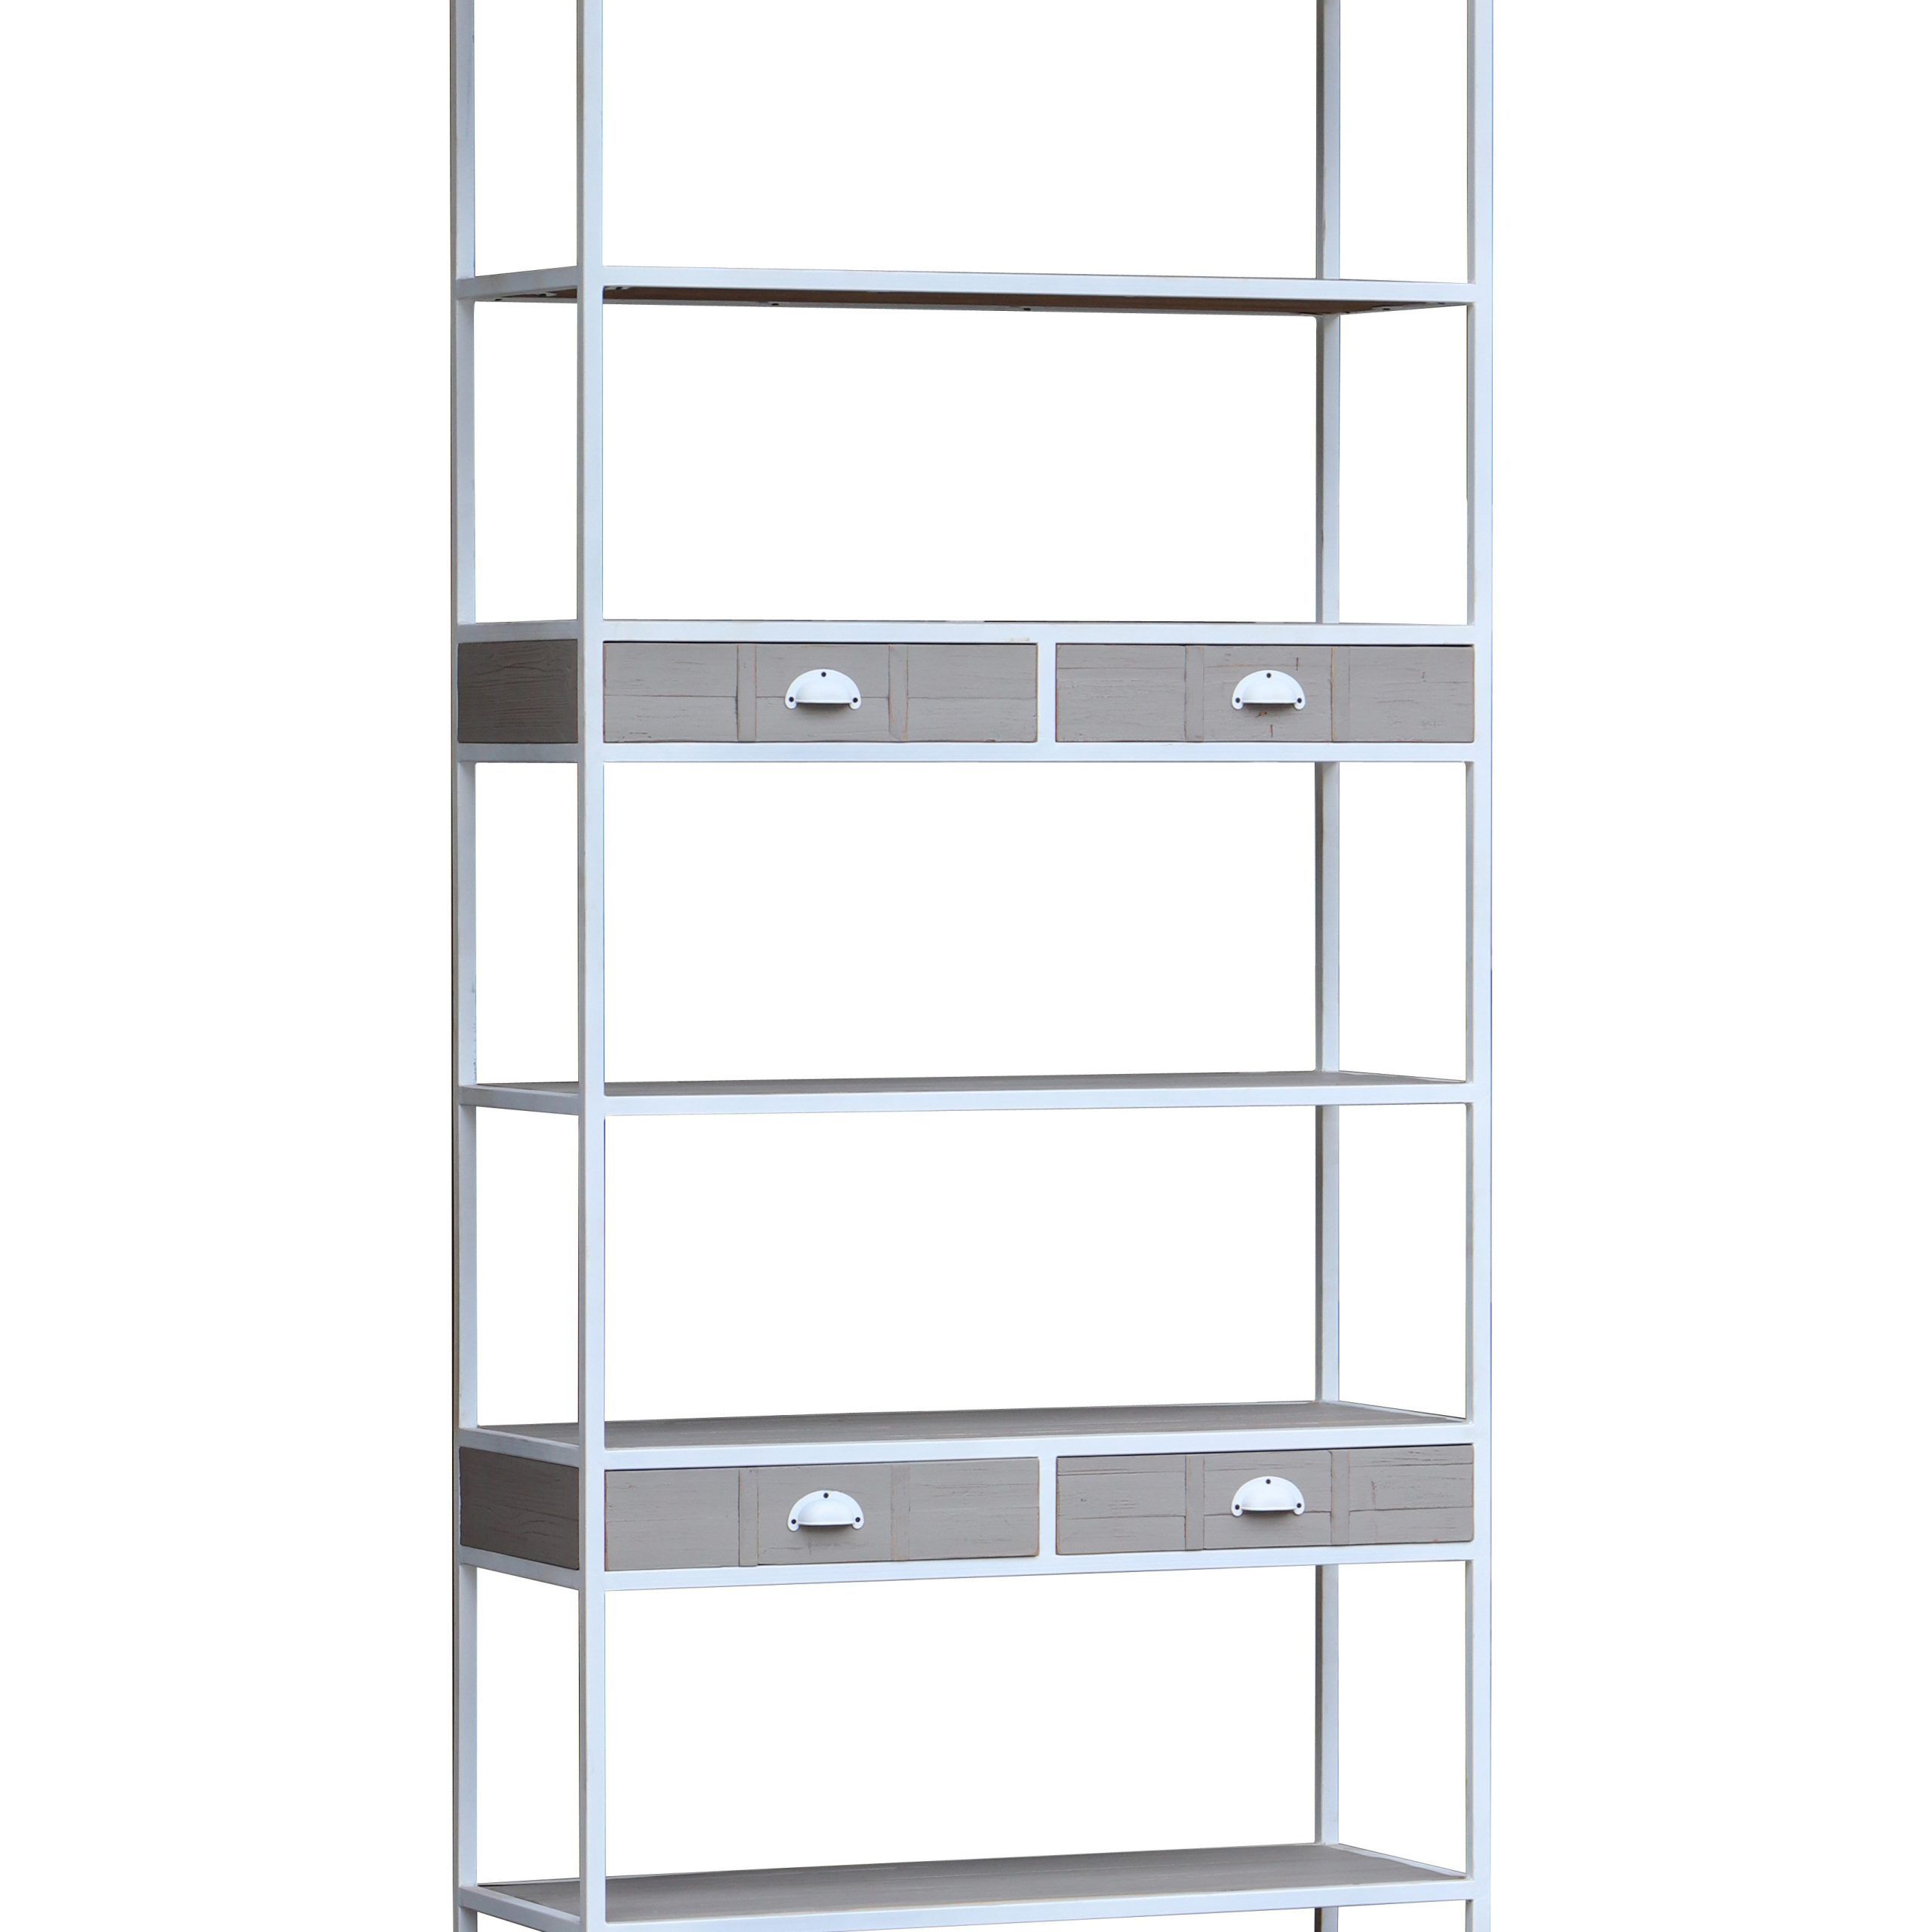 Galleryclassicsinc 85'' H Iron Bookcase | Wayfair Within Square Iron Bookcases (View 2 of 15)